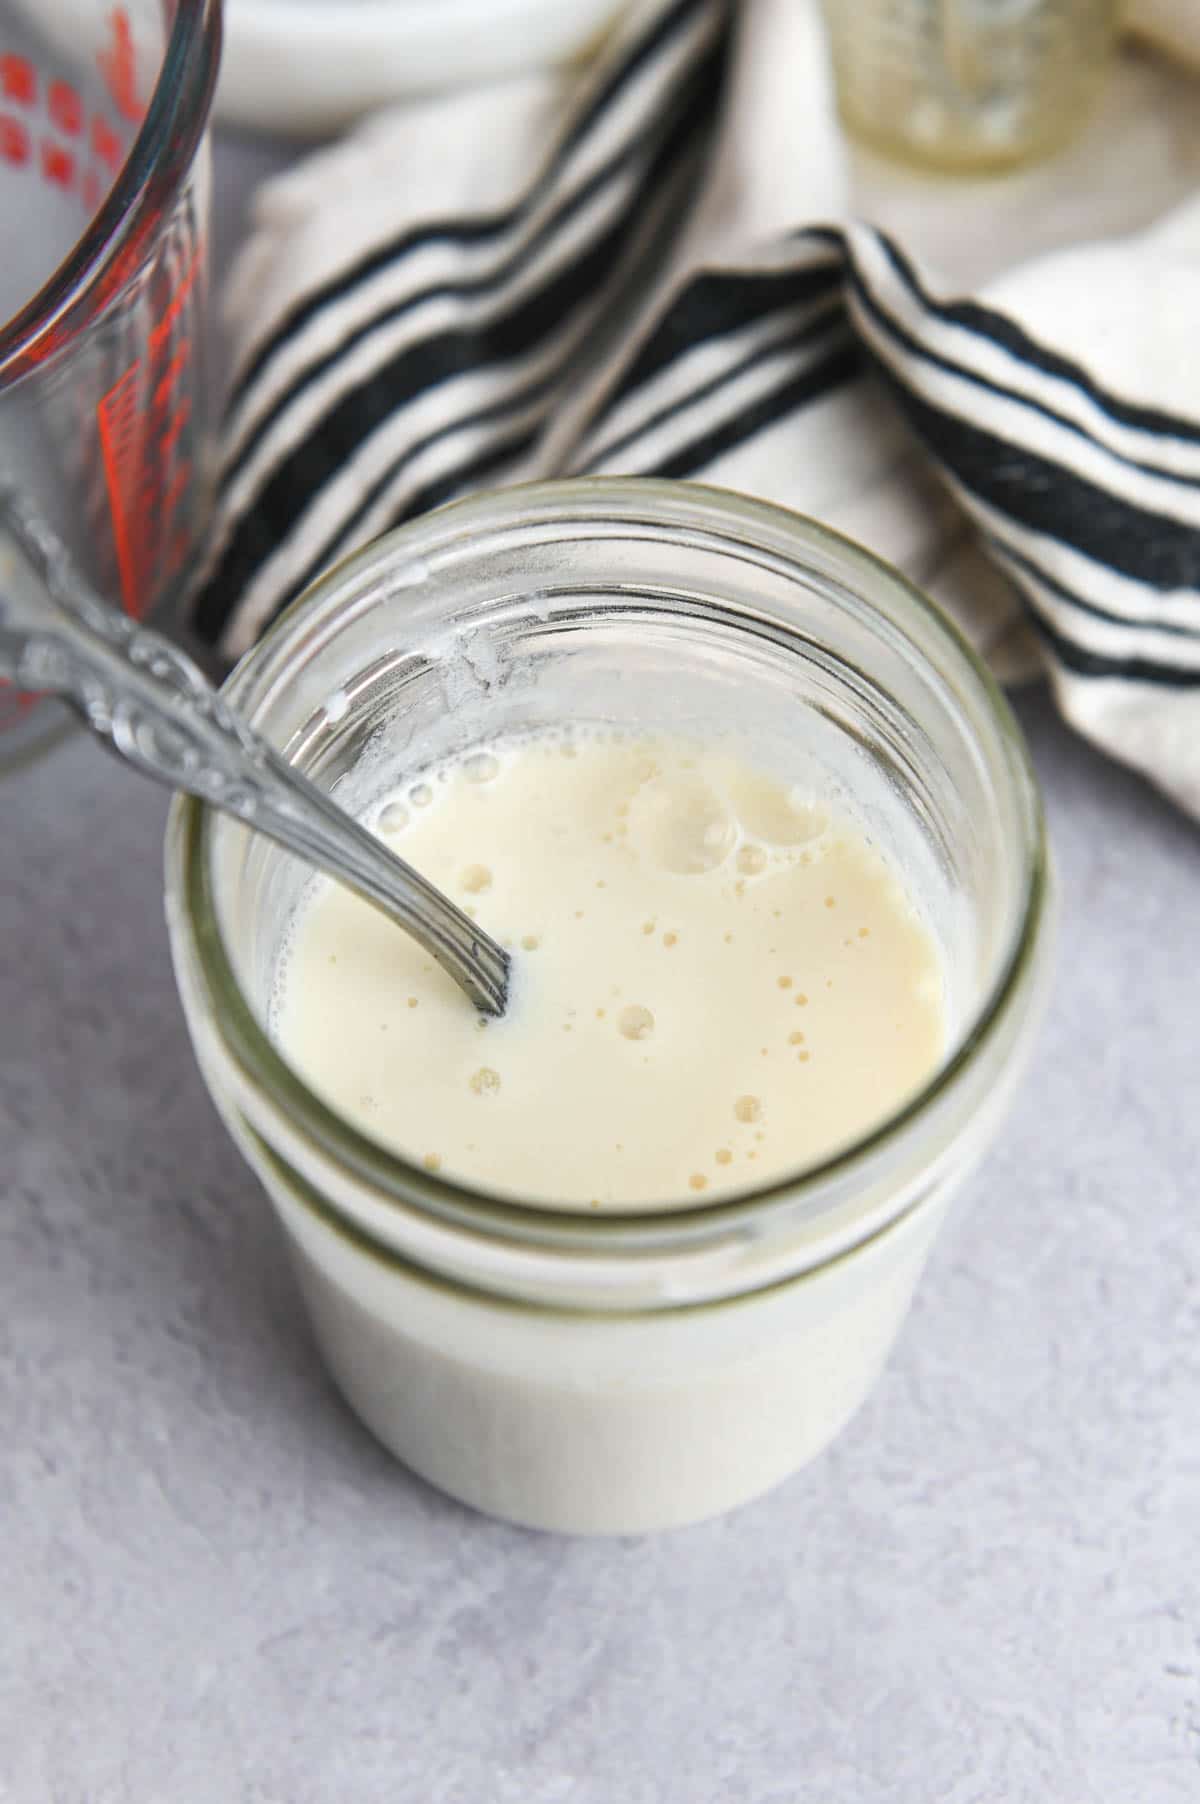 Spoon in a glass jar filled with buttermilk.